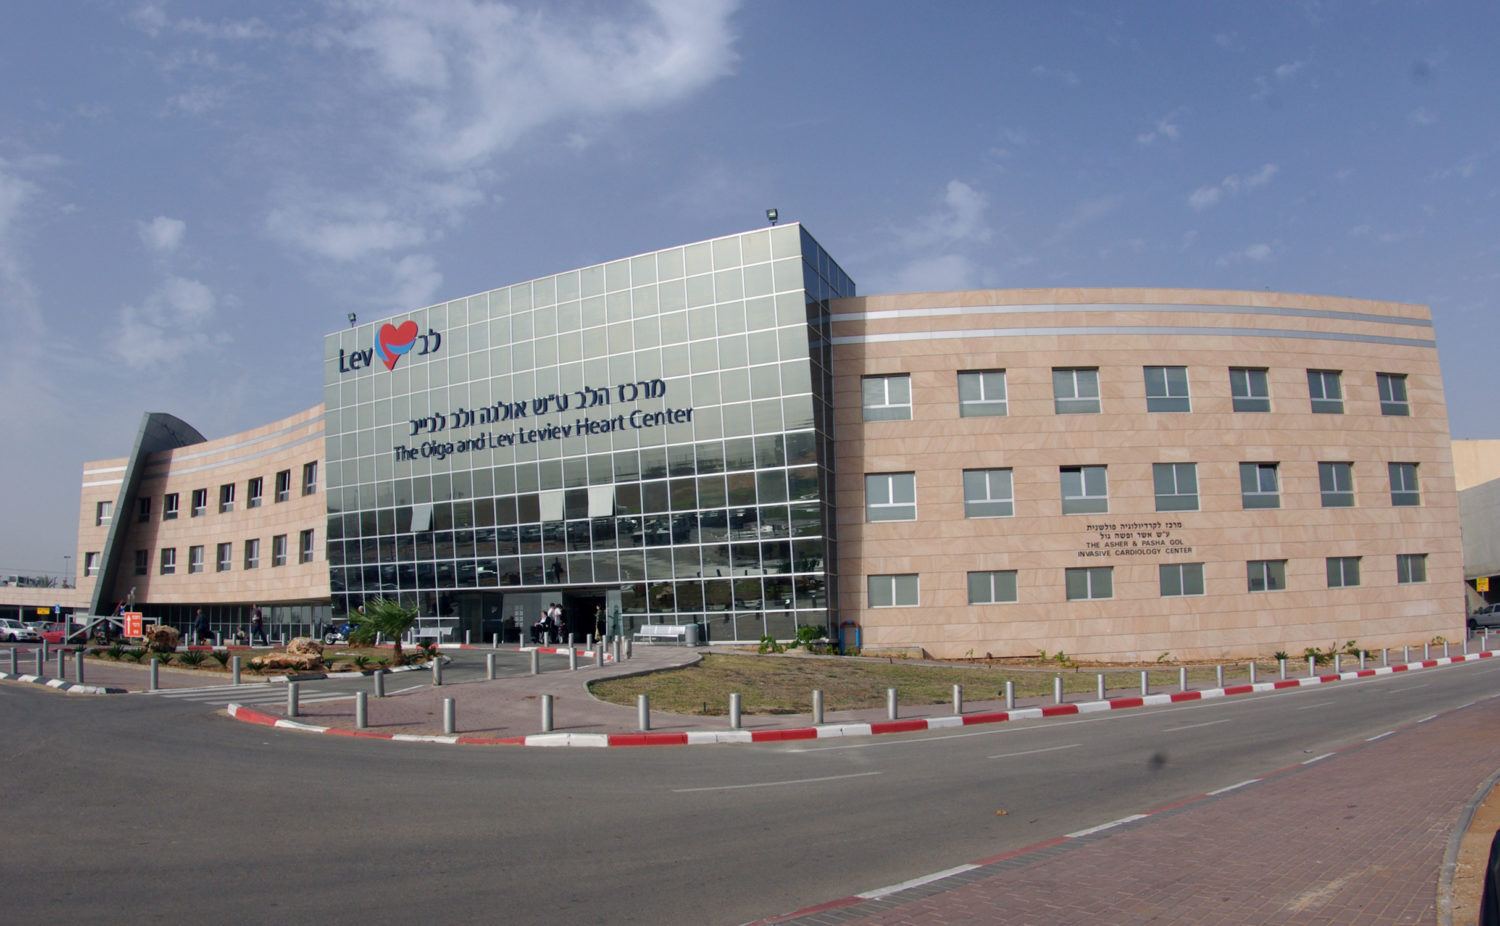 Sheba Medical Center to Create The First Fully VR-Based Hospital In The World Sheba Medical Center Declares Israel’s “City of Health”, Inks $350M Deal